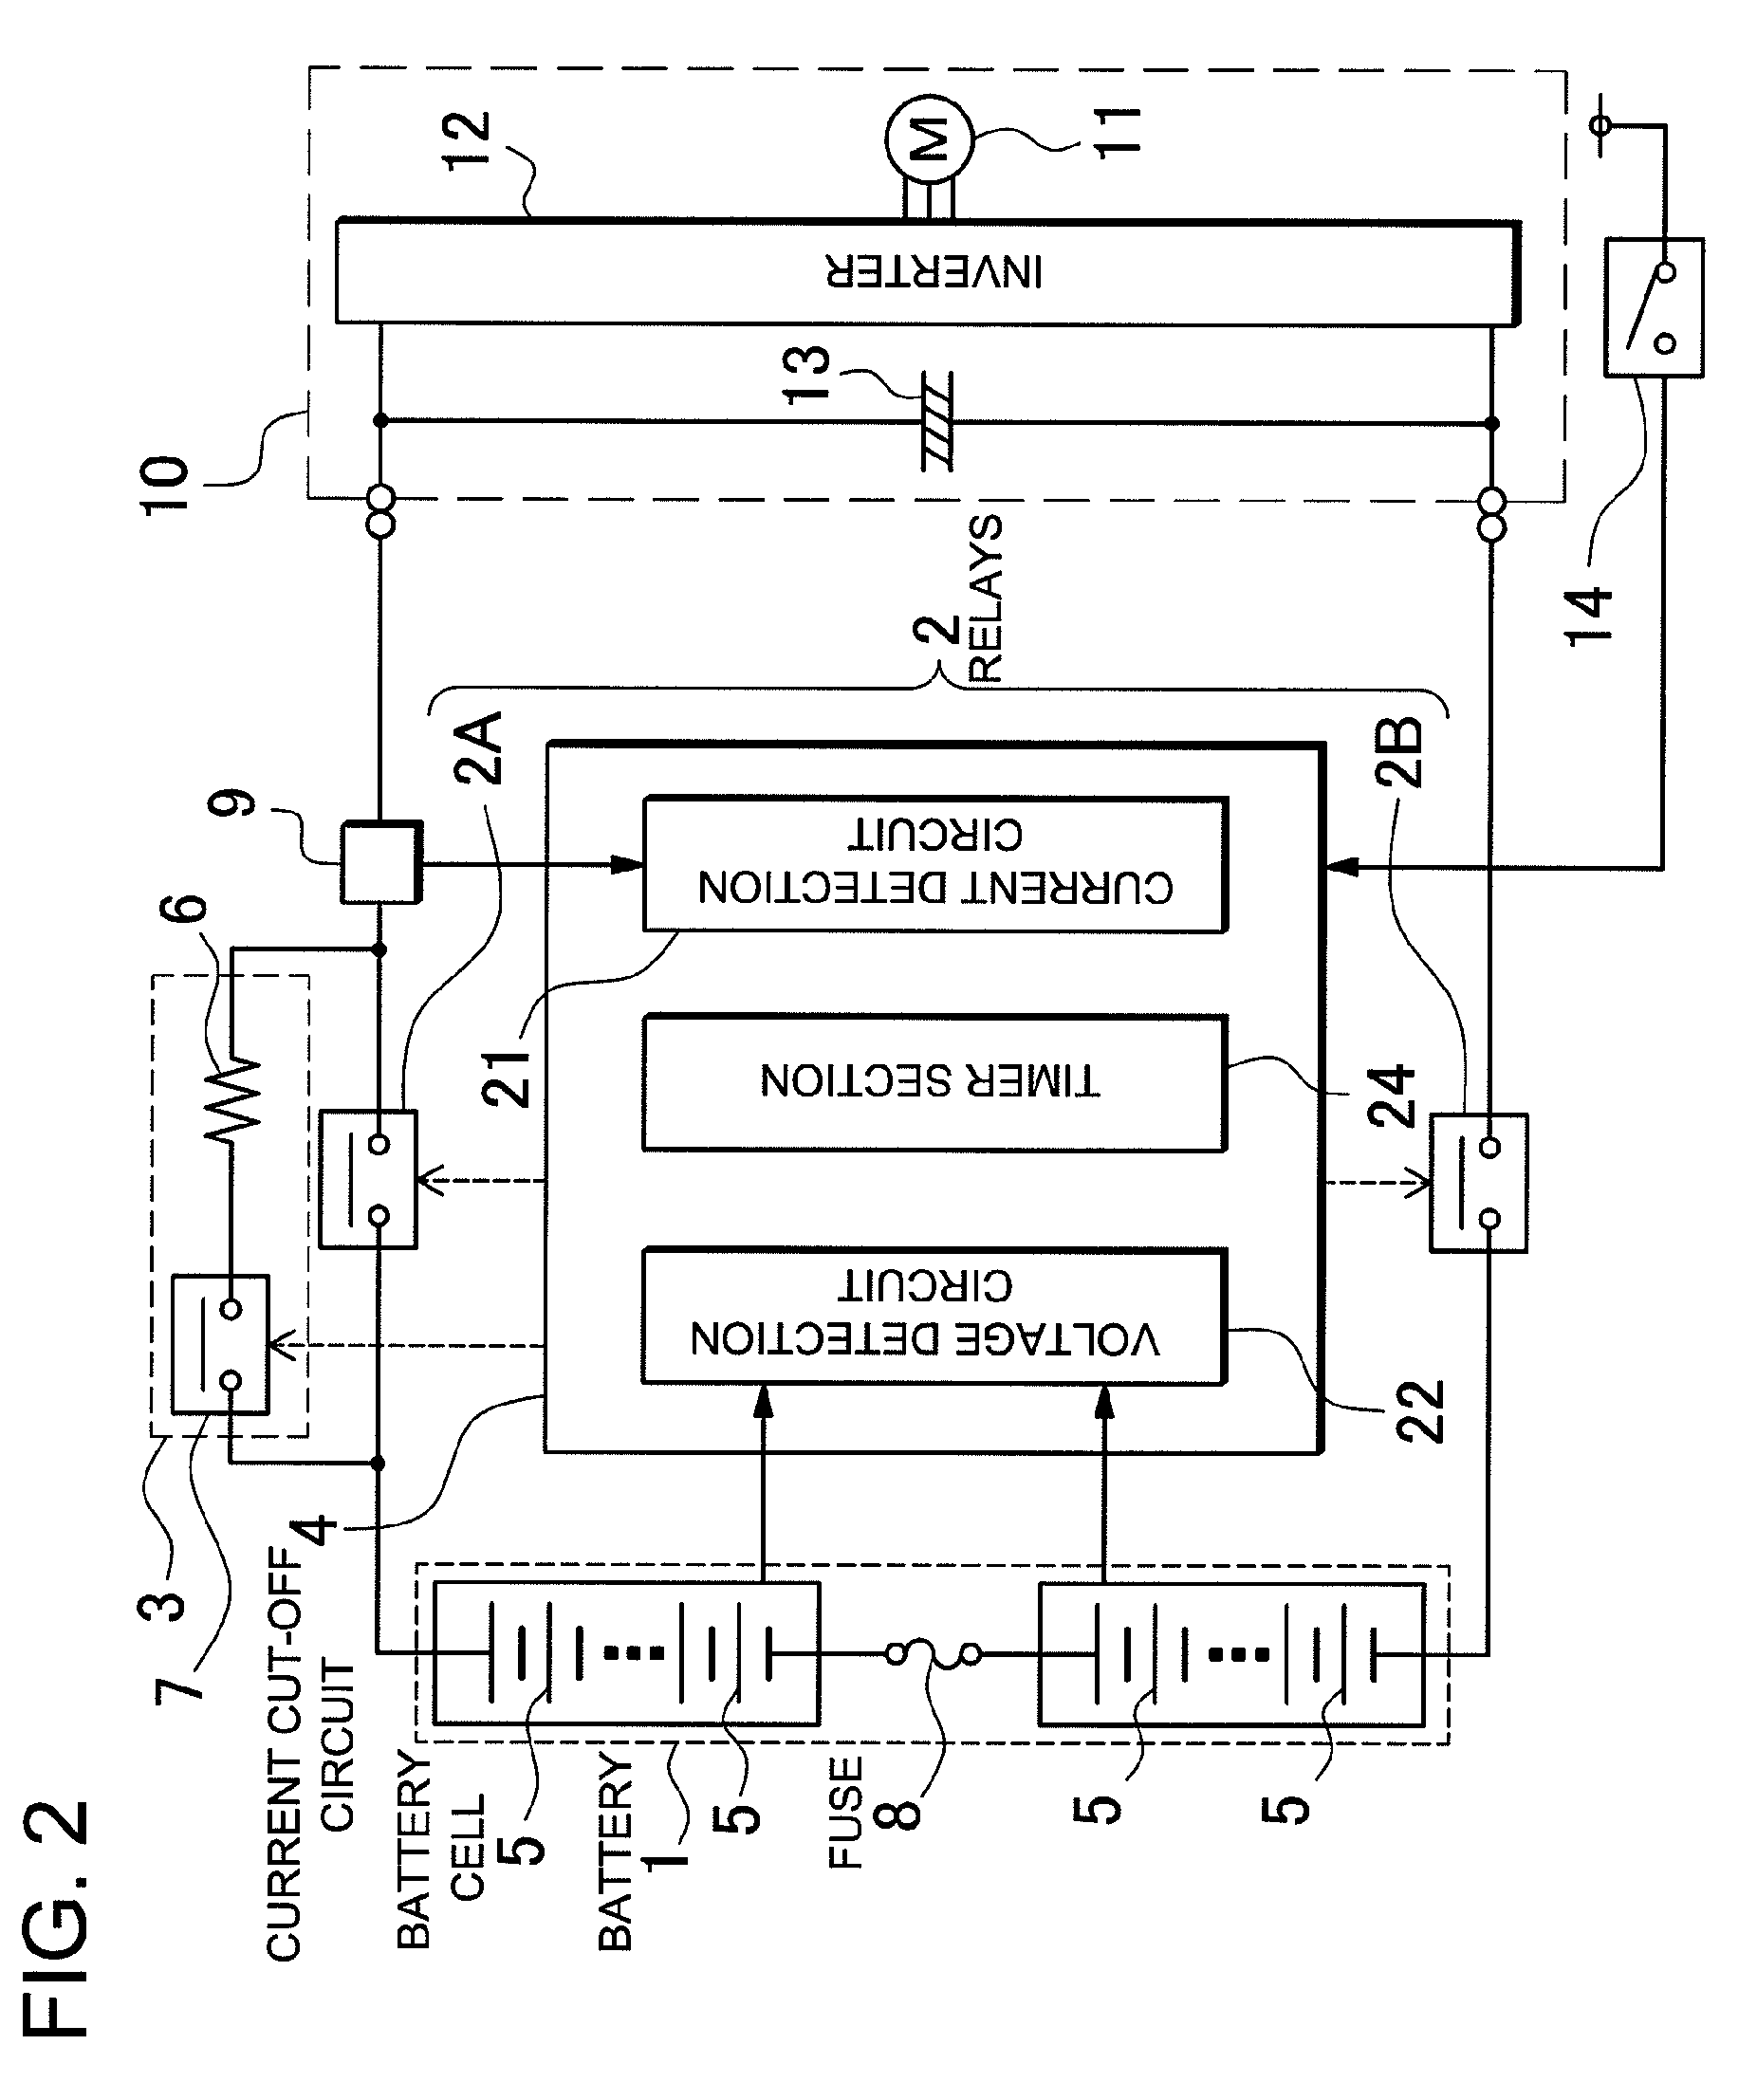 Battery system with relays